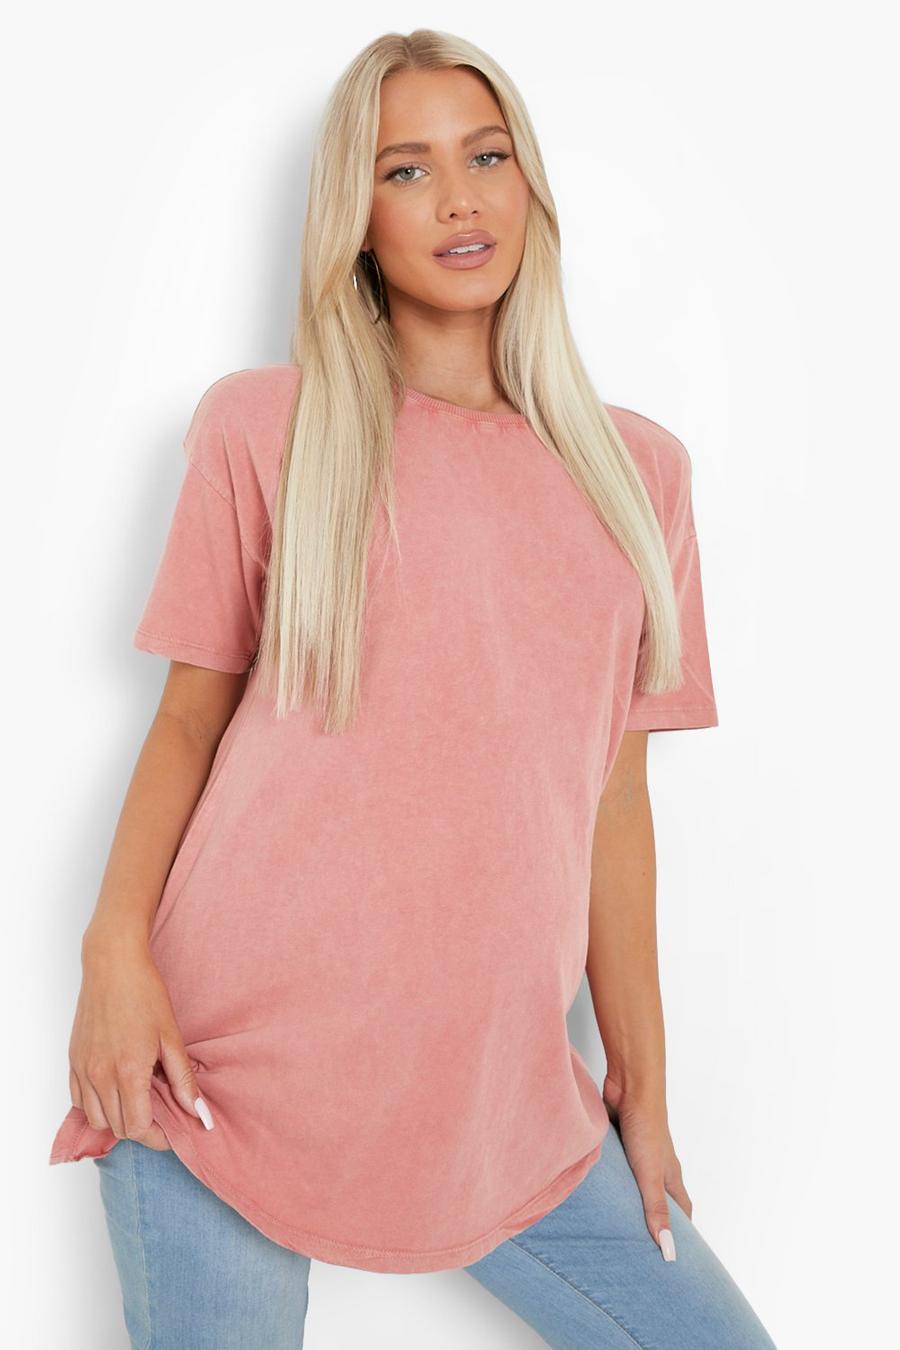 Dusty rose pink Maternity Washed Out T-Shirt